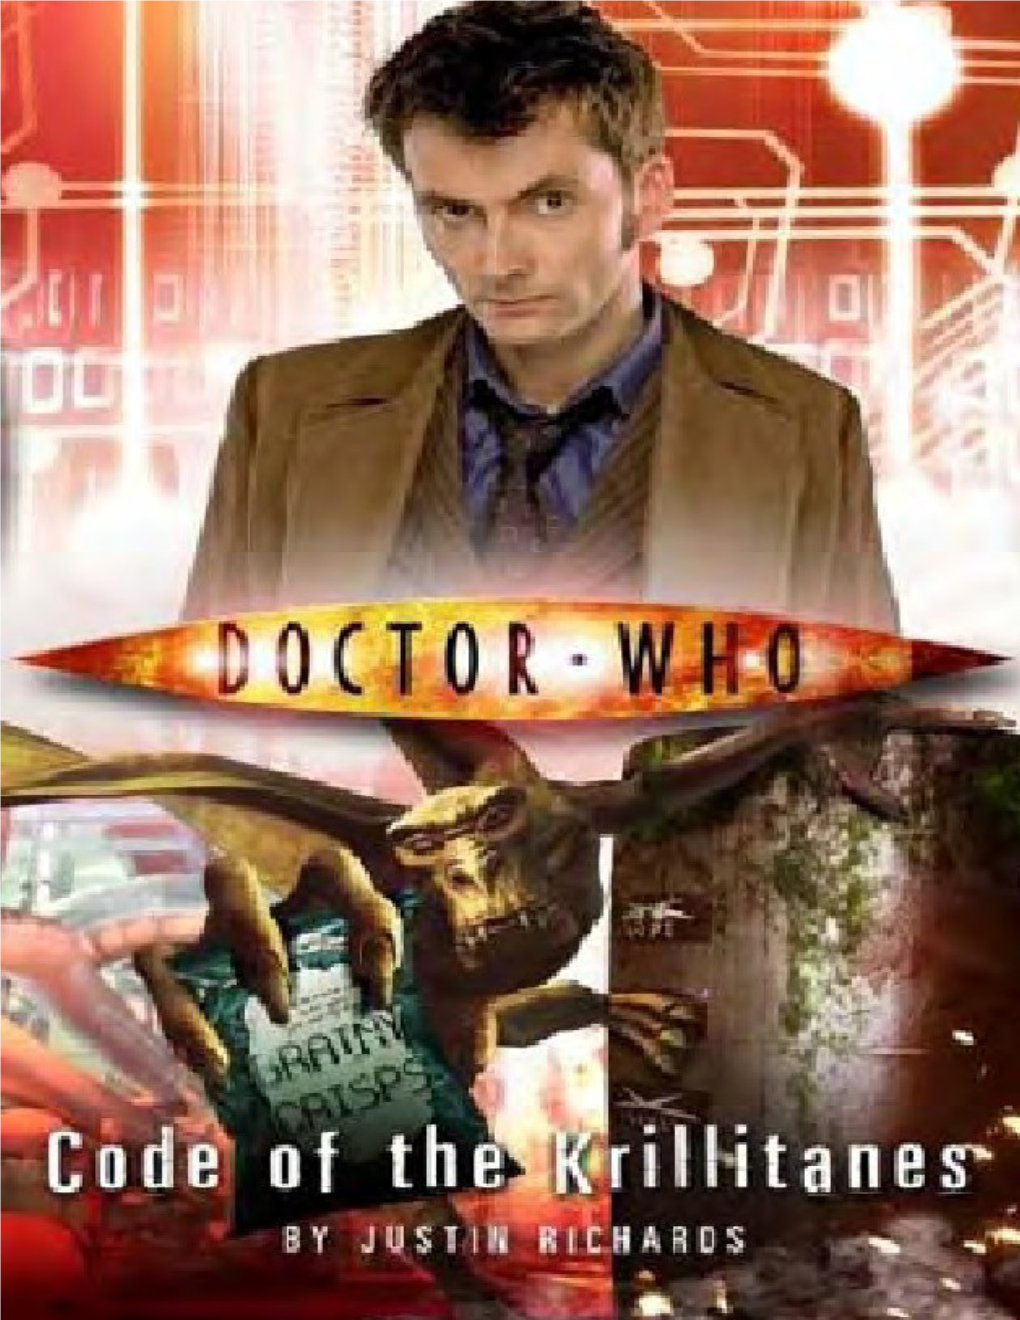 Doctor Who: Code of the Krillitanes